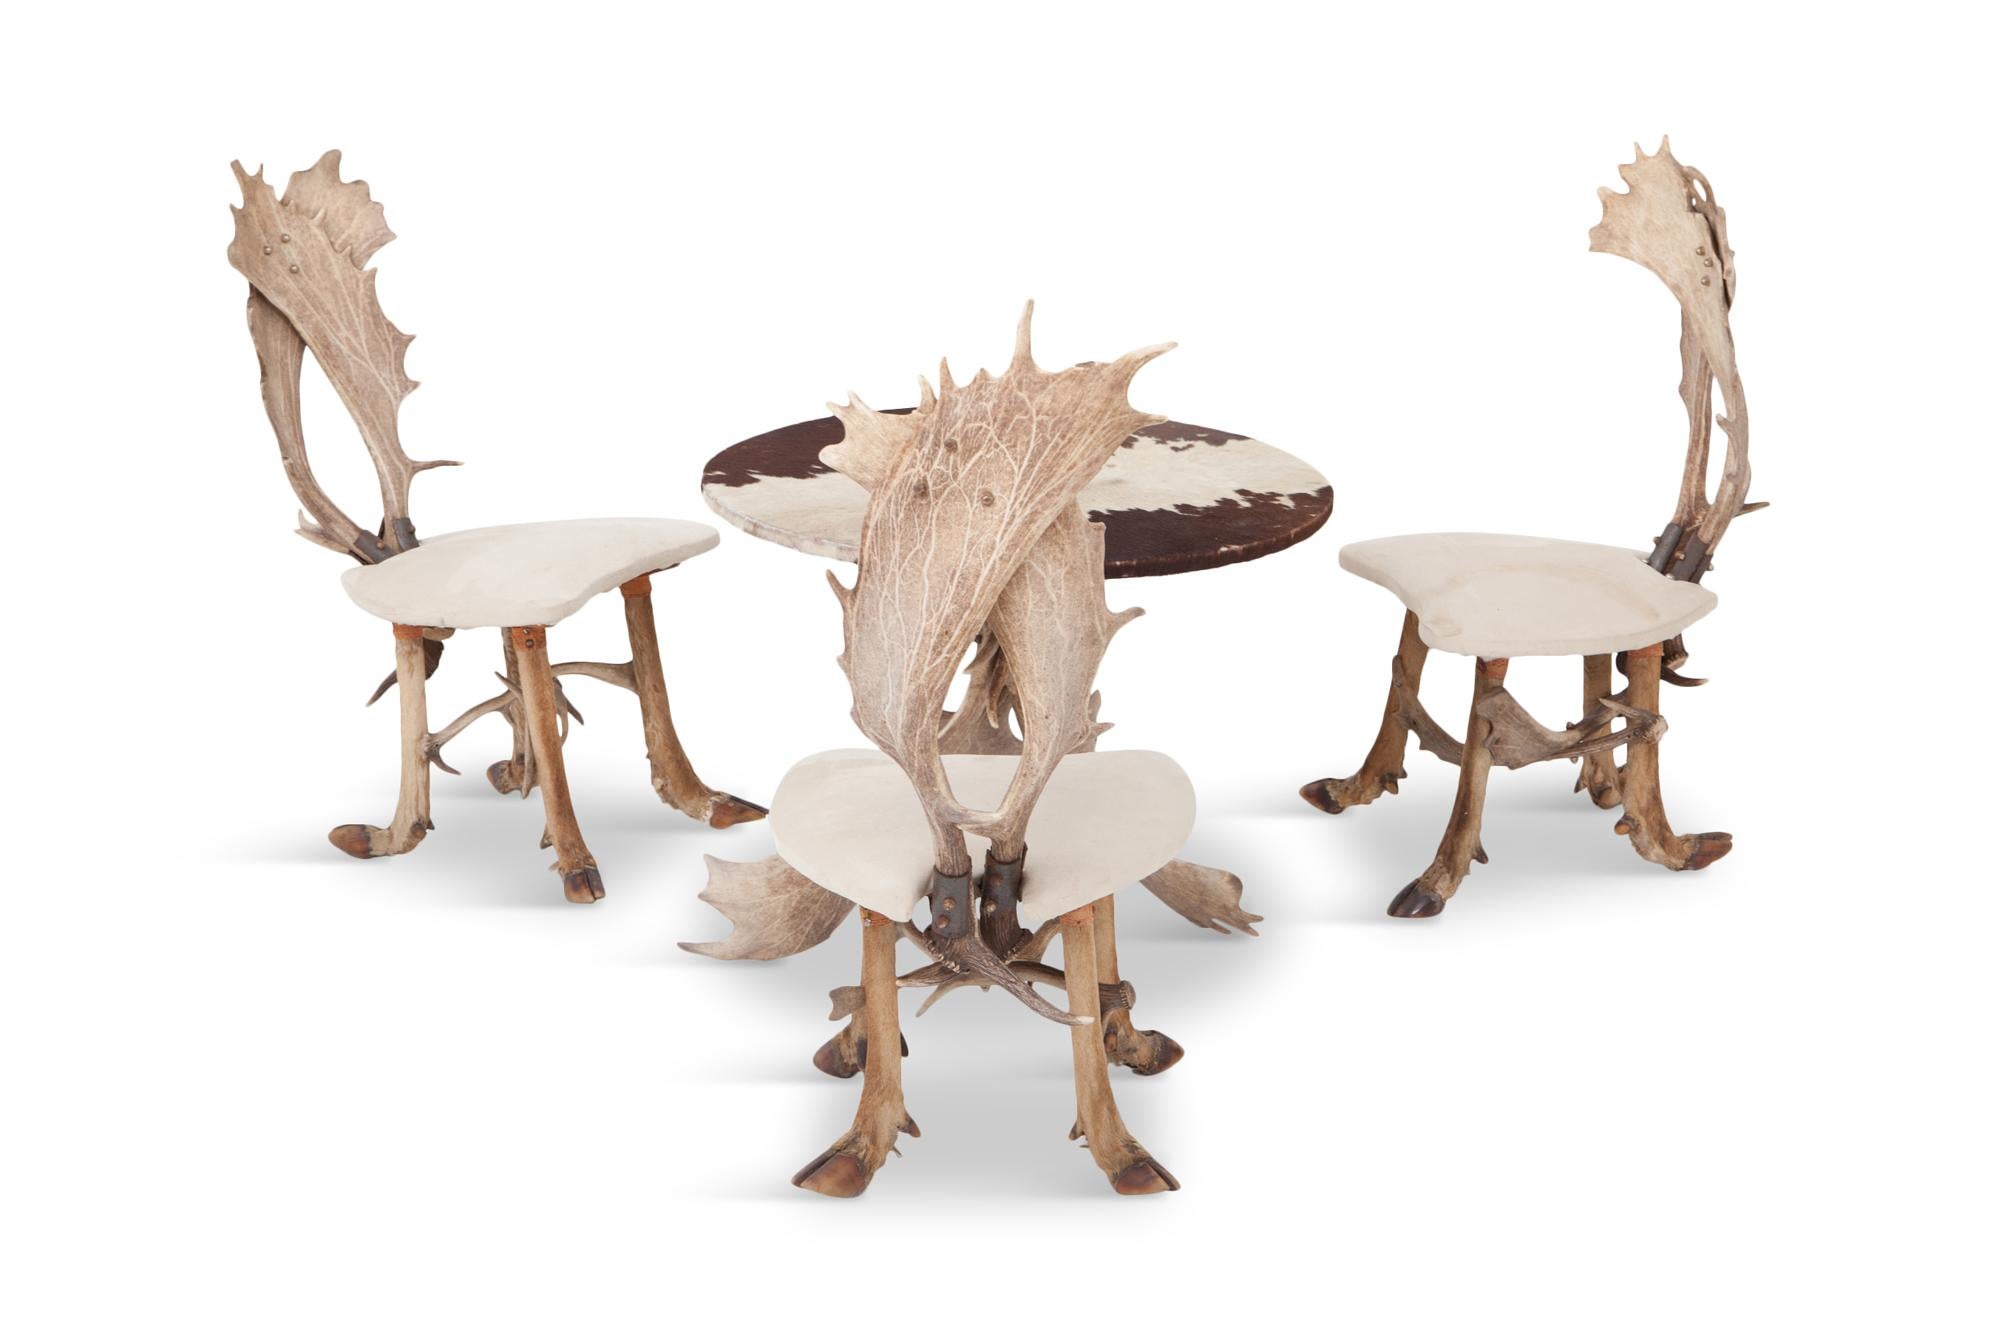 Midcentury Hunting chairs 1960s
The back of the chairs are made of two deer antlers while the legs are constructed out of deer hooves. The seats are upholstered in a light neutral velvet upholstery. 

The matching round centre table is available